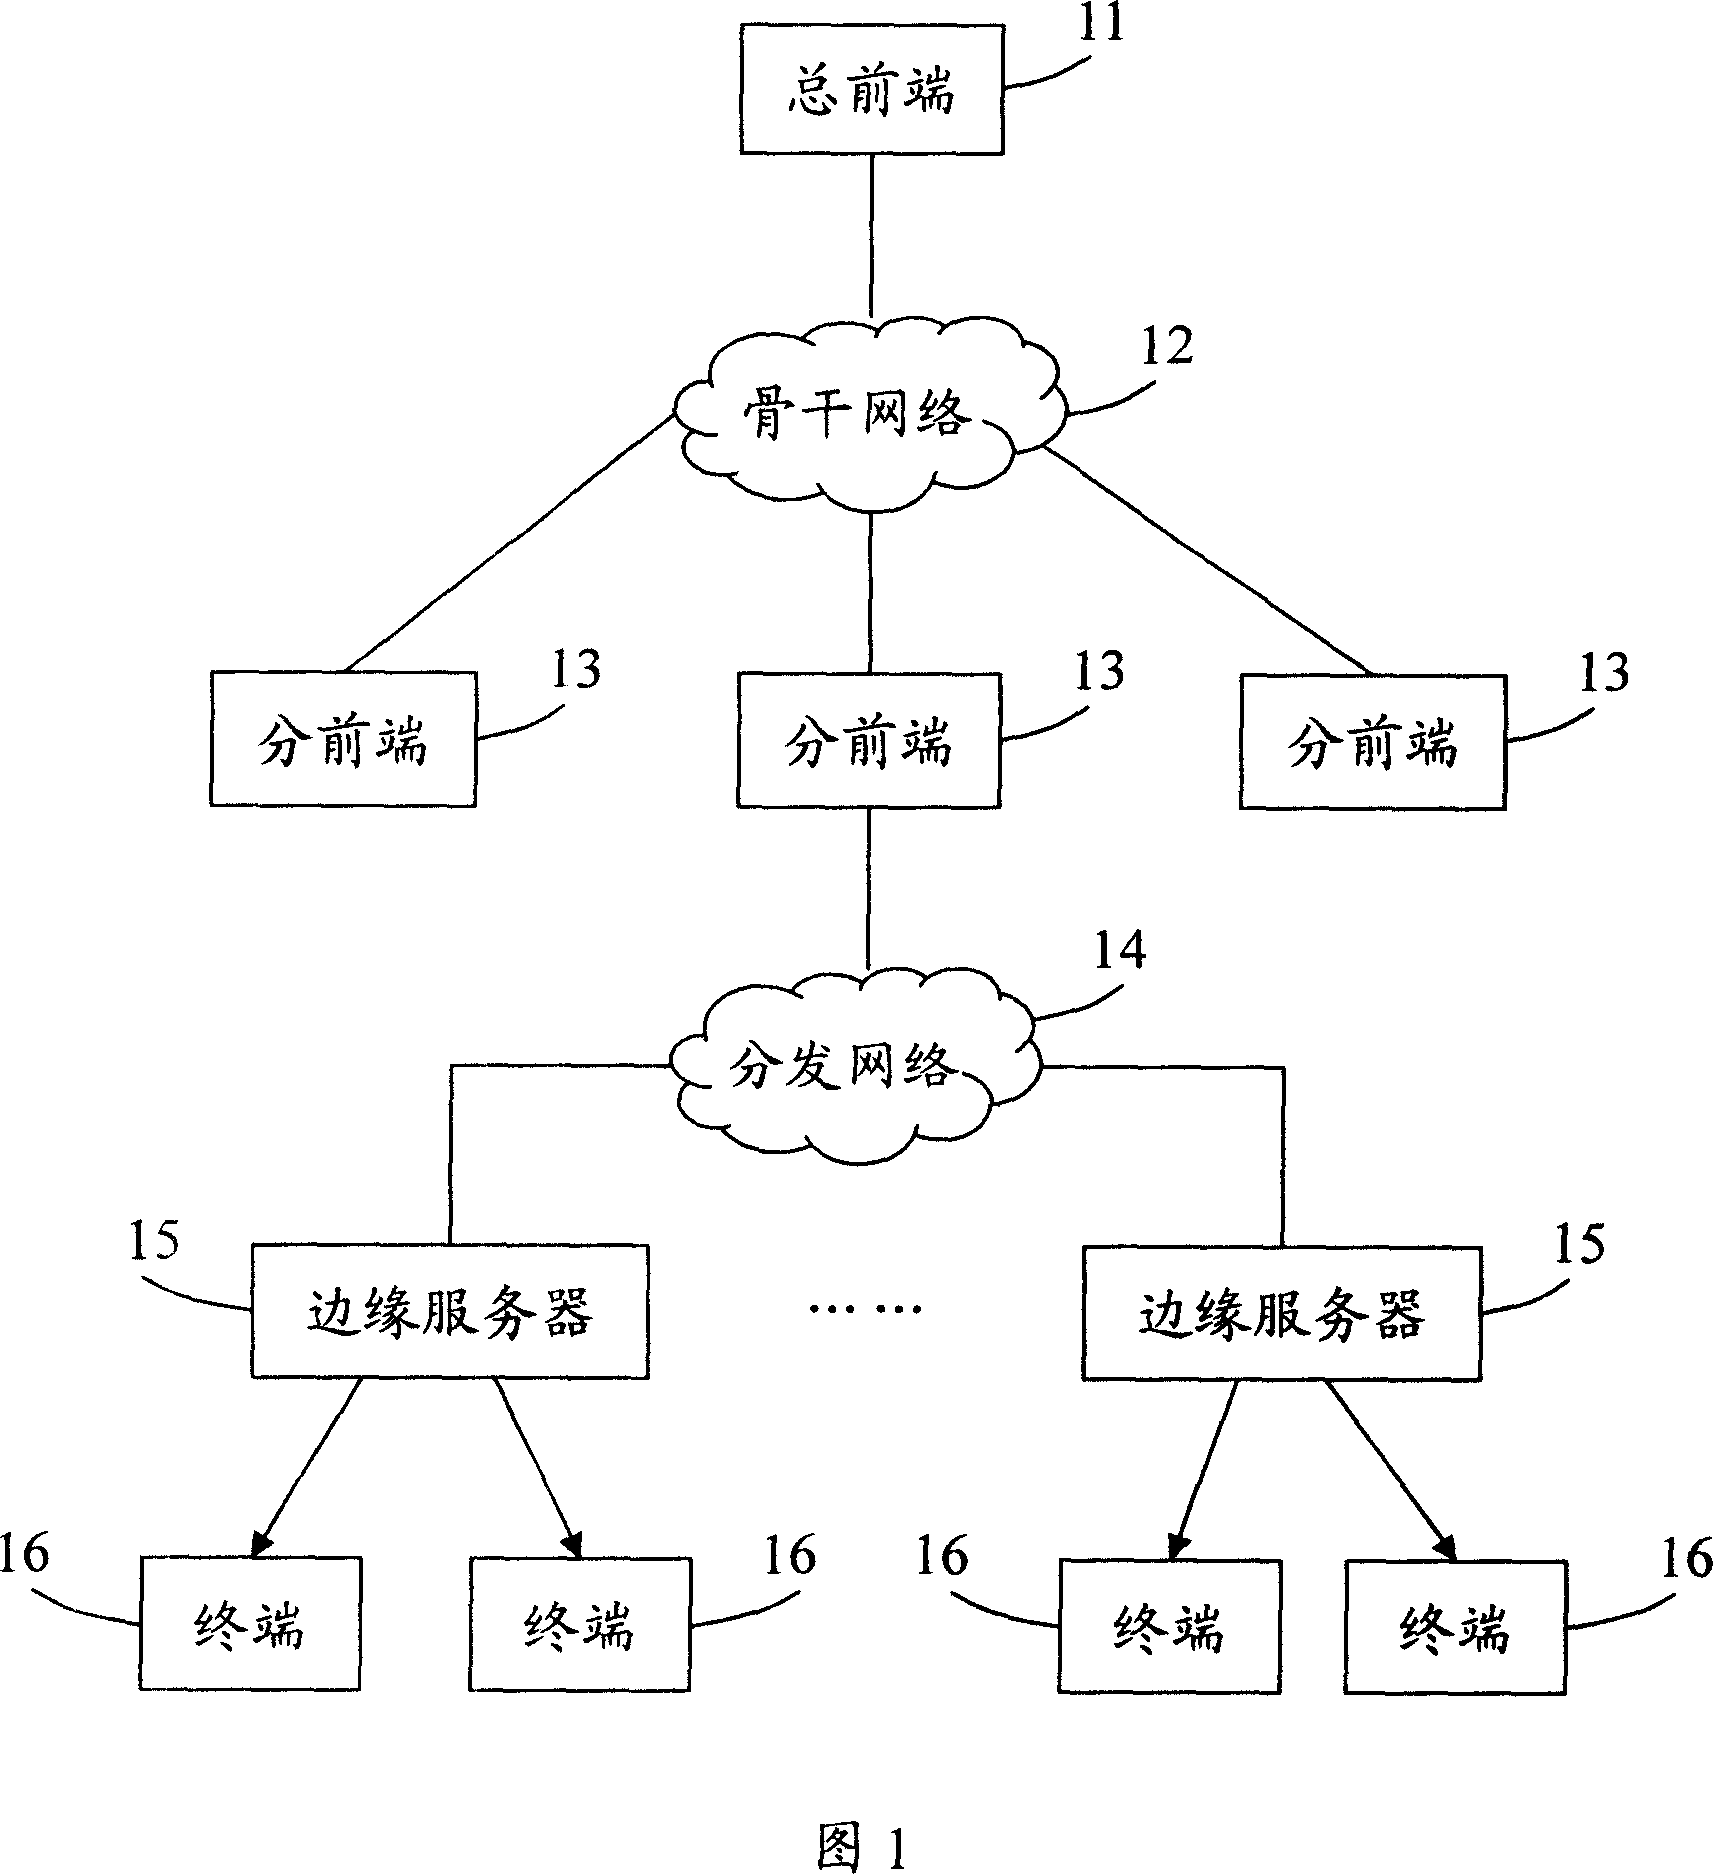 A network TV monitoring system and method